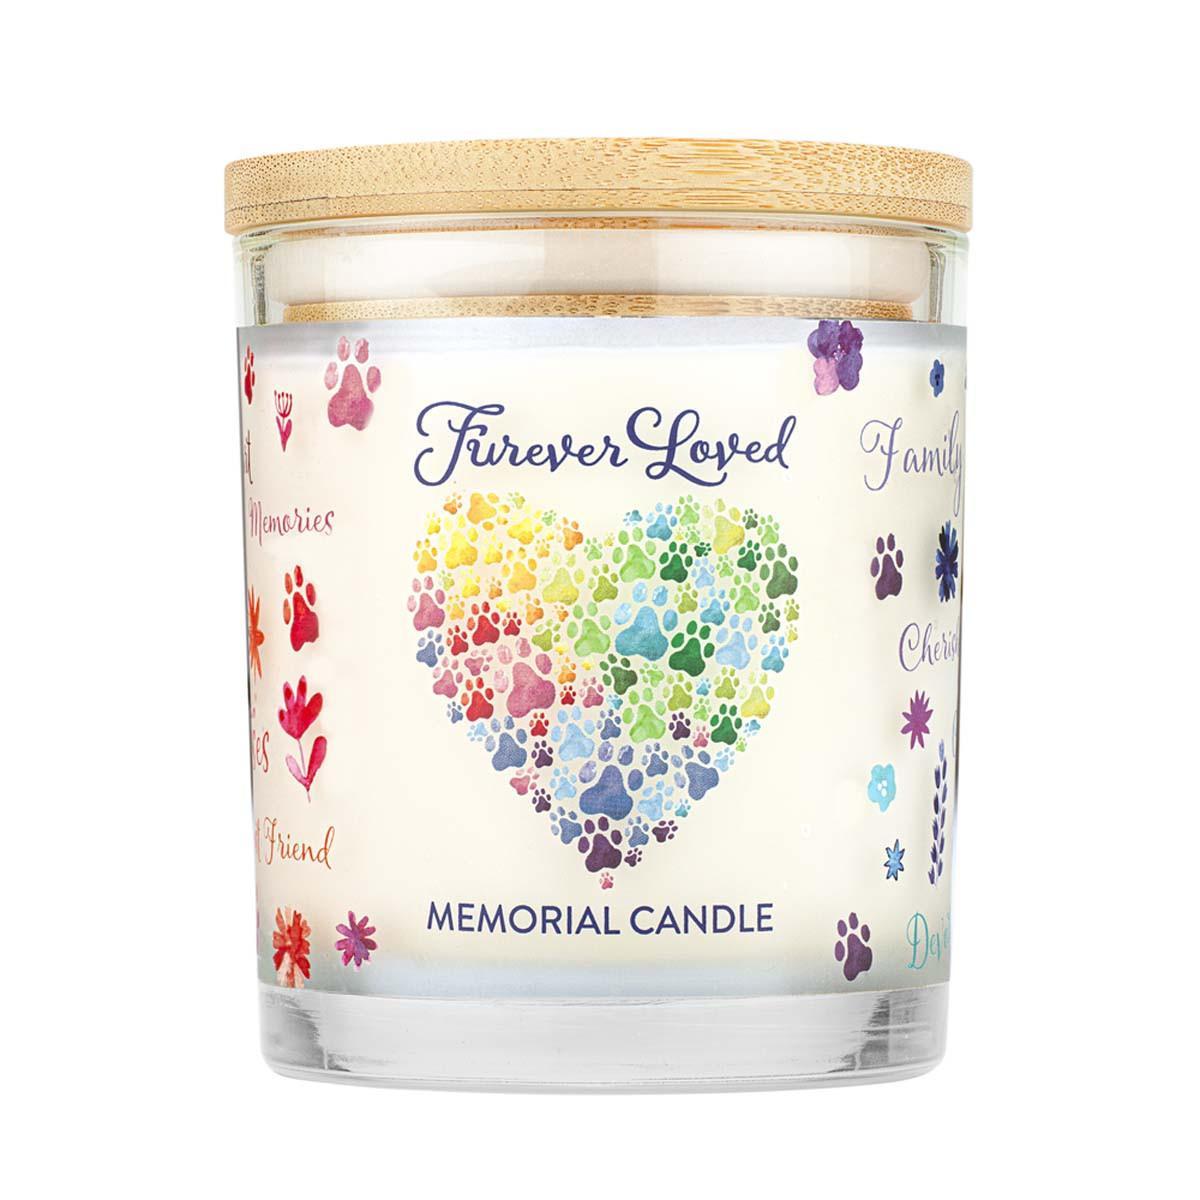 Pet House Memorial Candle